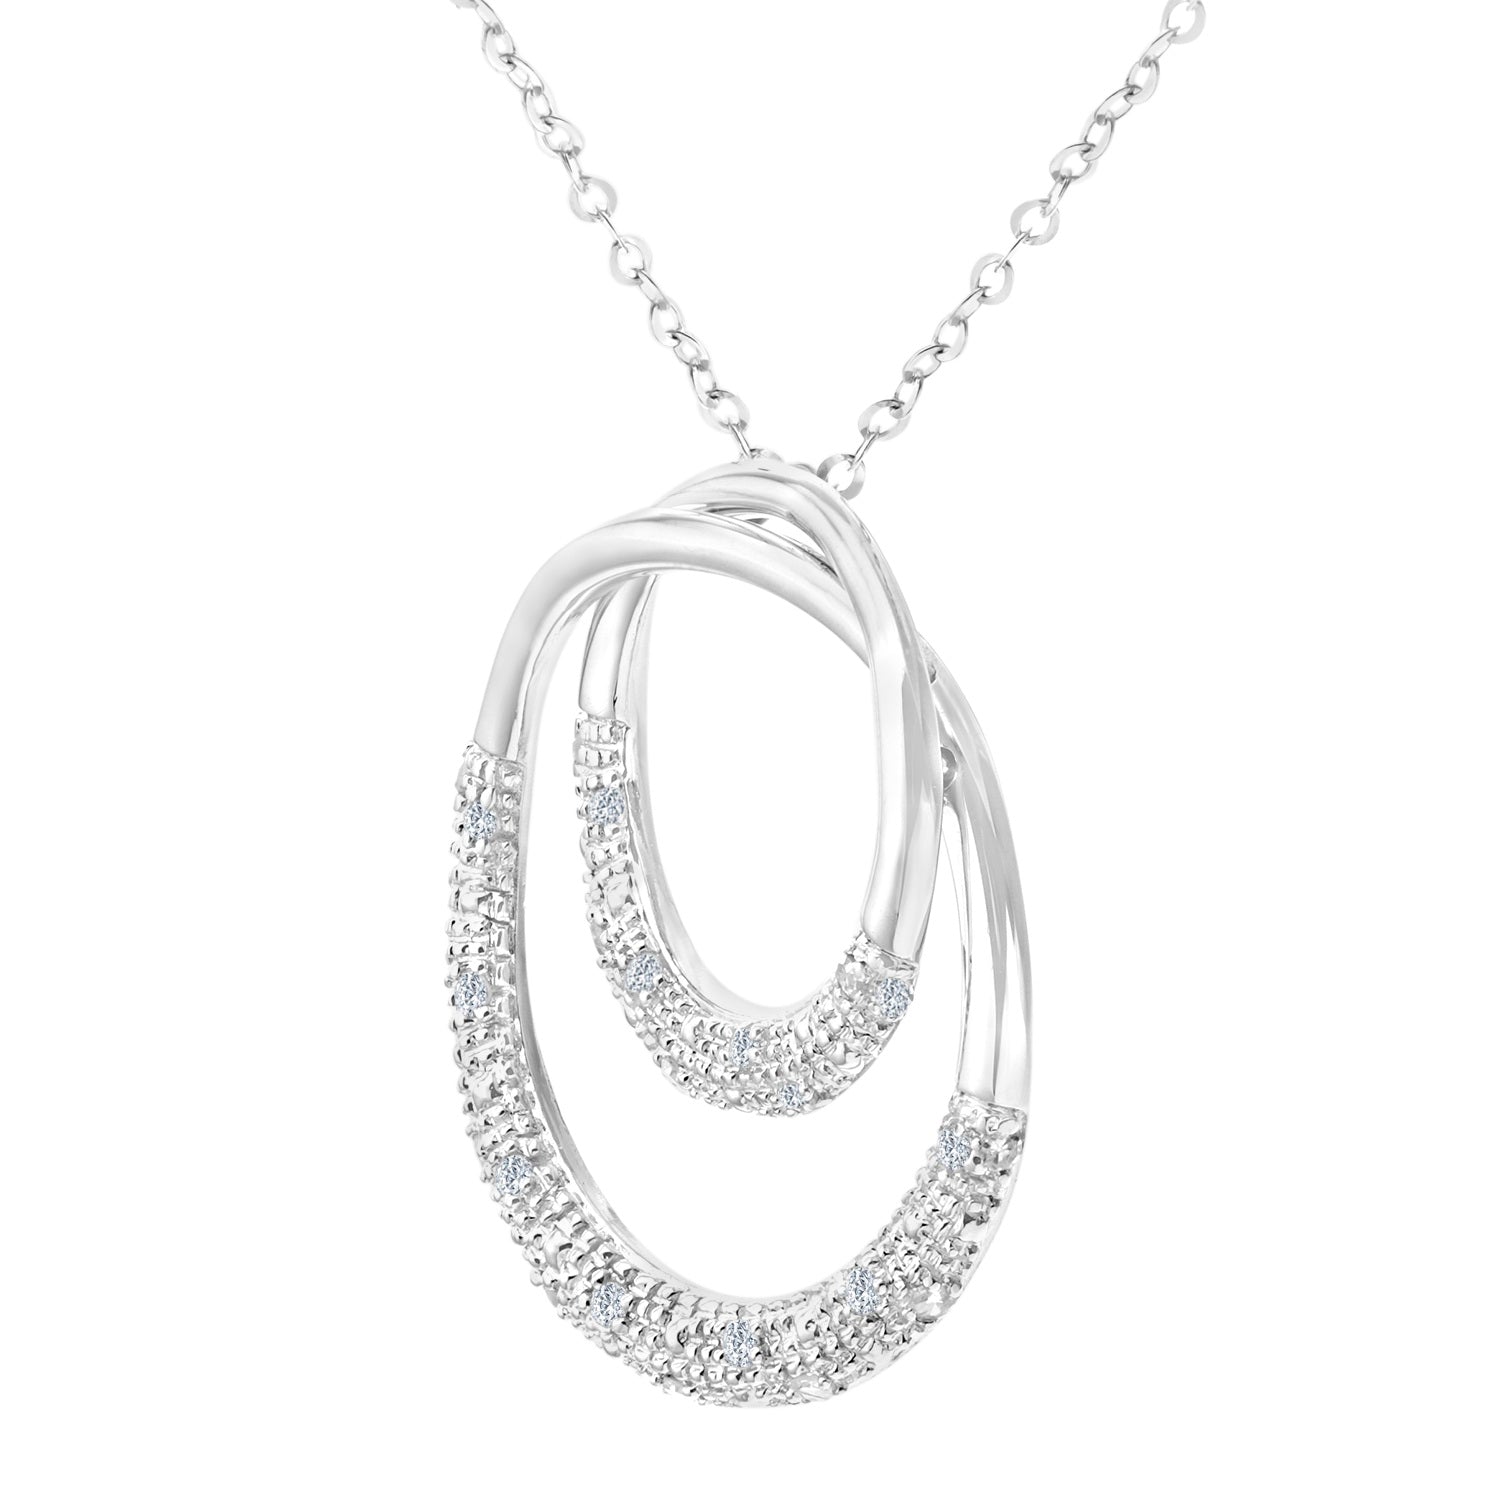 9ct White Gold  10pts Diamond Circle Pendant Necklace 18 inch - PP0AXL4217W